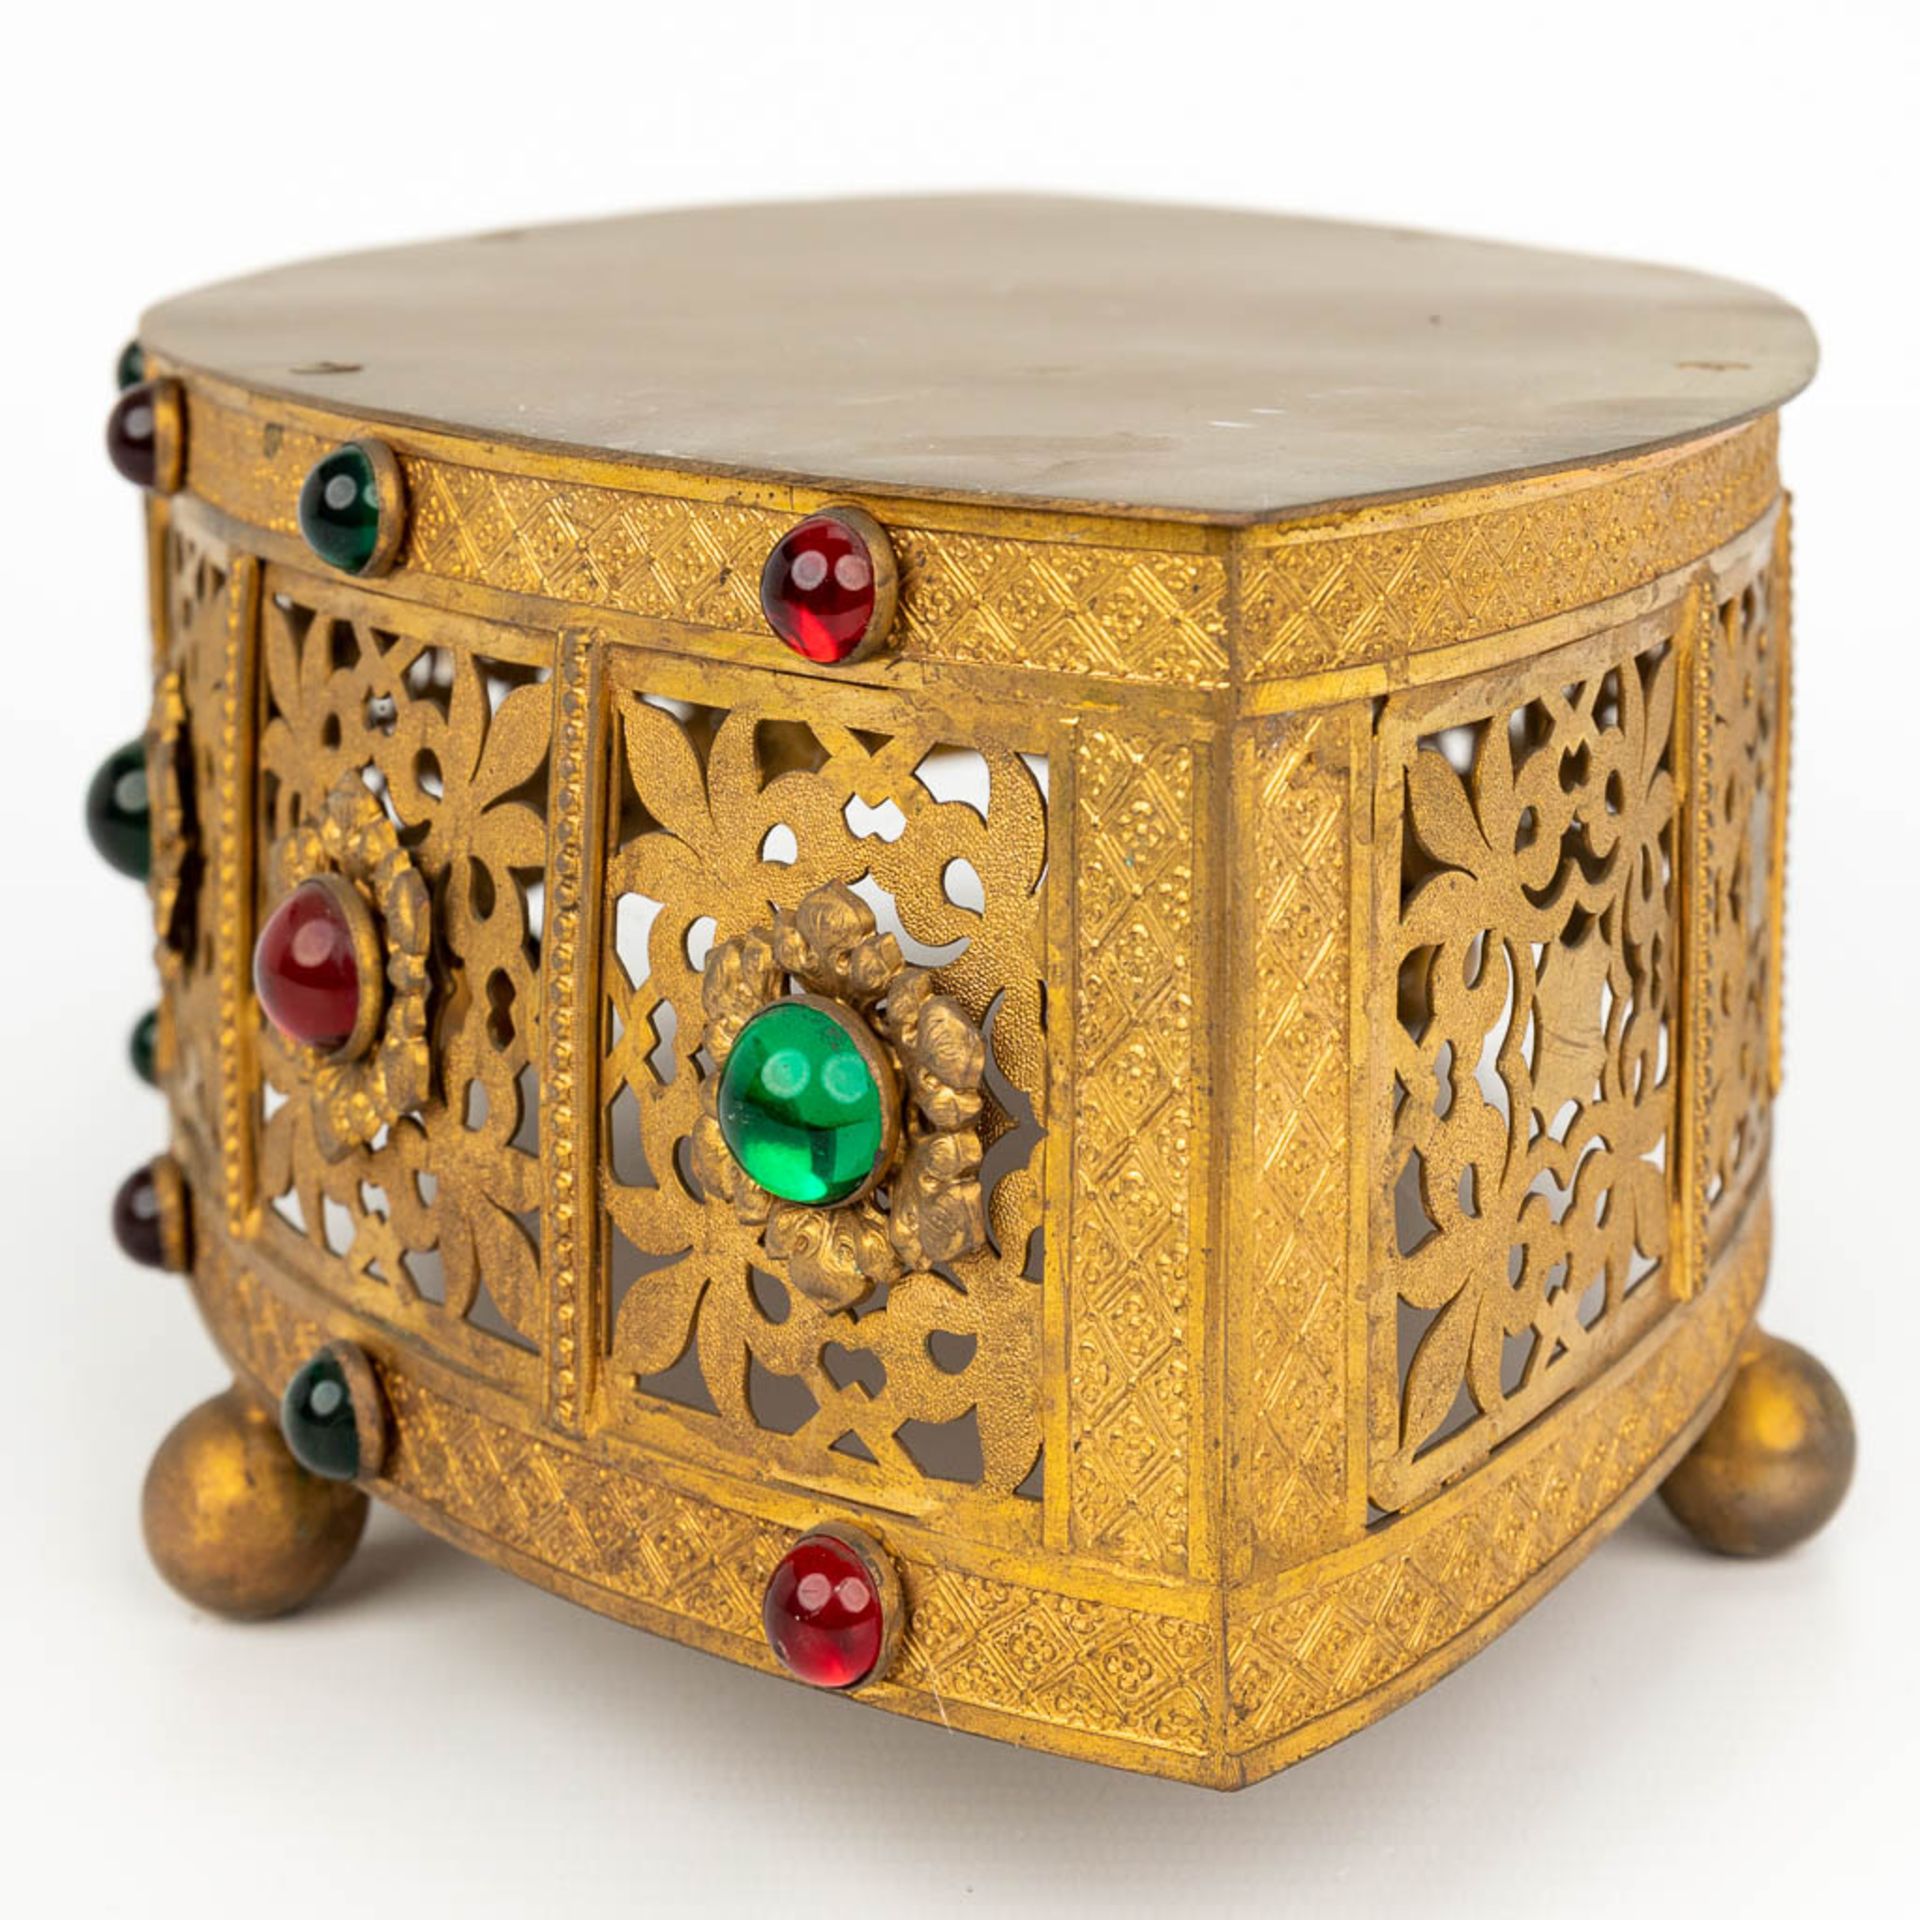 A neogothic base made of brass and decorated with cloisonné enamel and cabochons. (H:11cm) - Image 4 of 11